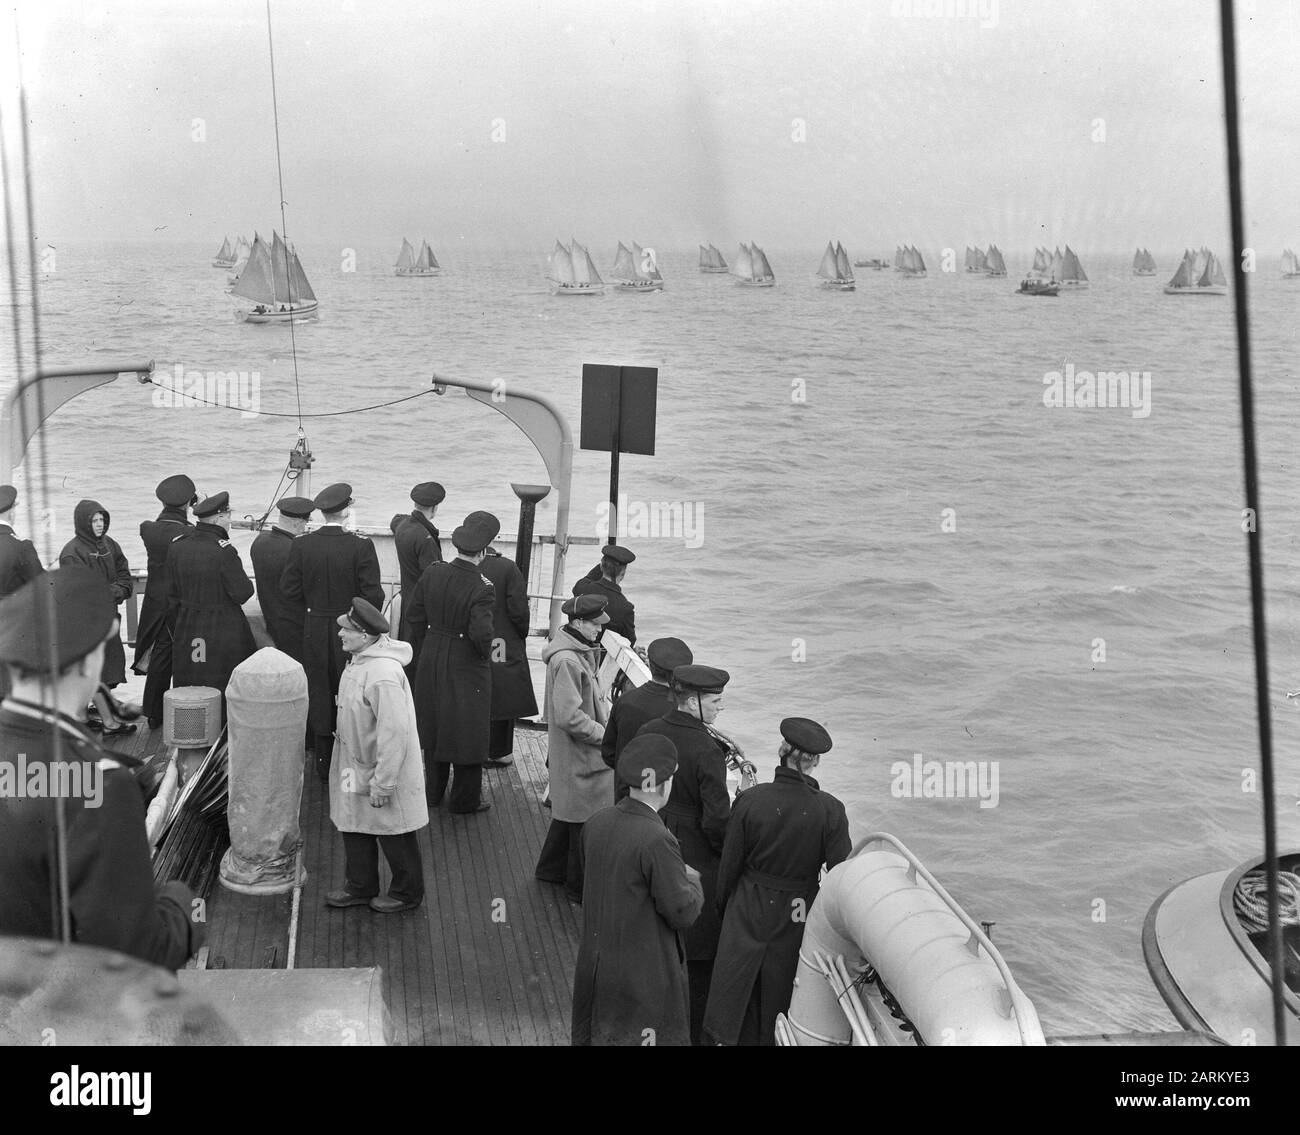 Royal Navy Navy Navy sailing competition Colonel Bax Date: October 24, 1952 Keywords: MARINE, sailing matches Personal name: Colonel Bax Institution name: Marine Stock Photo